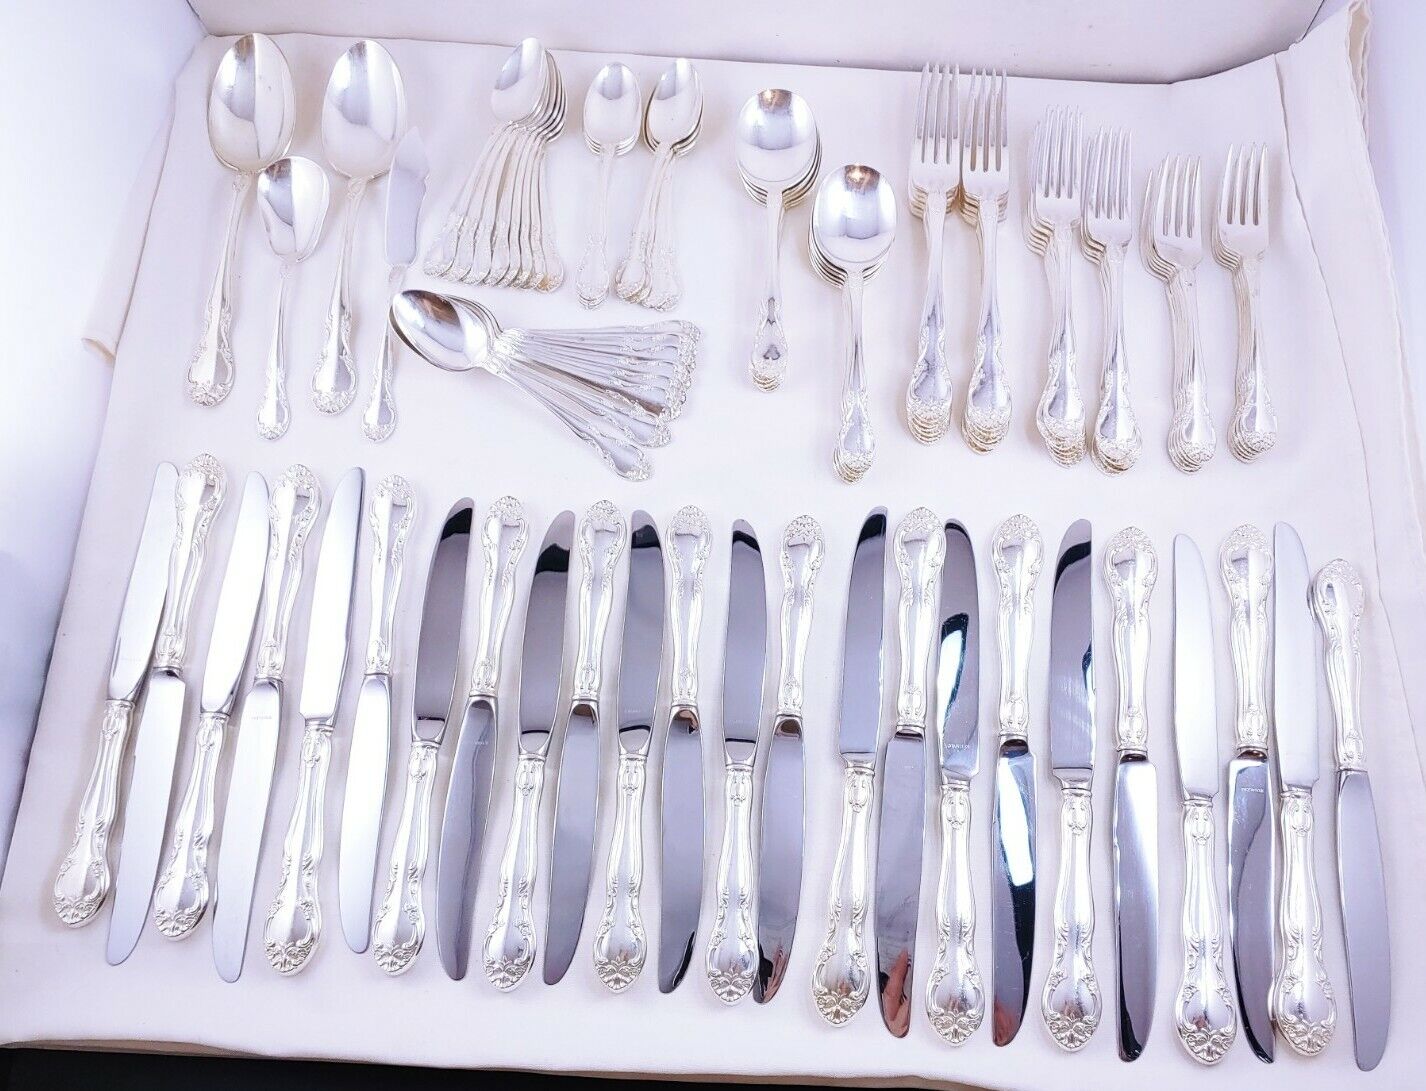  GORHAM Silver Plate French Classic Flatware 100 pc Service for 12 setting of 7